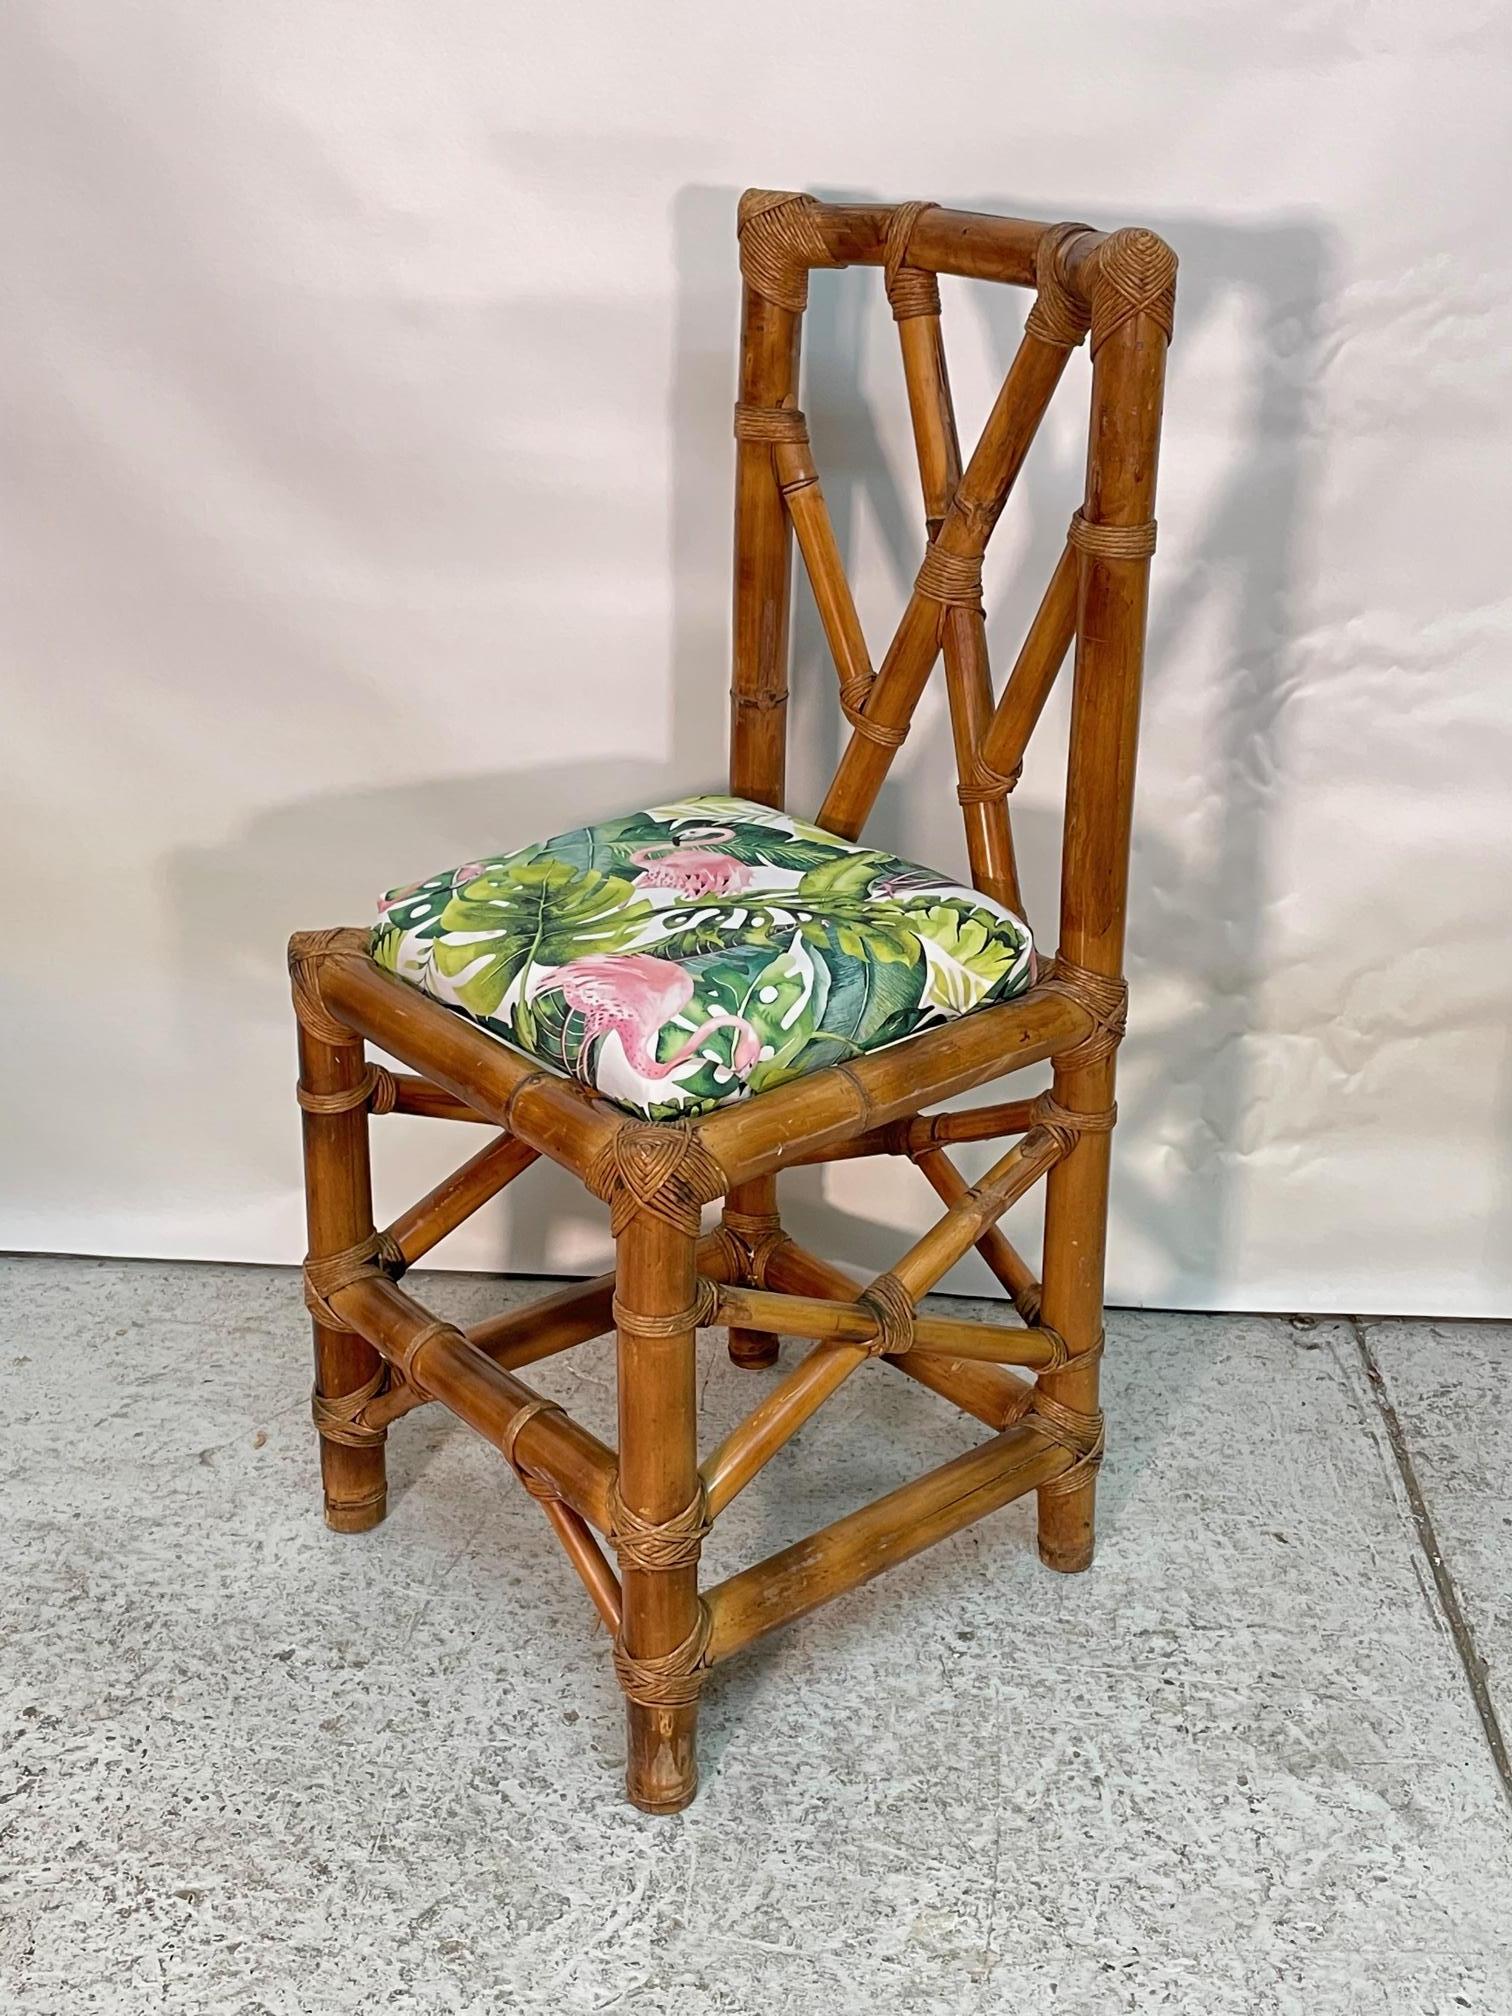 Vintage bamboo game table set features an octagon shaped table with smoke glass top and six dining chairs. Could also be a breakfast dining set. Chairs are upholstered in new fabric, a fun, tropical print with pink flamingos. Intricate fretwork in a